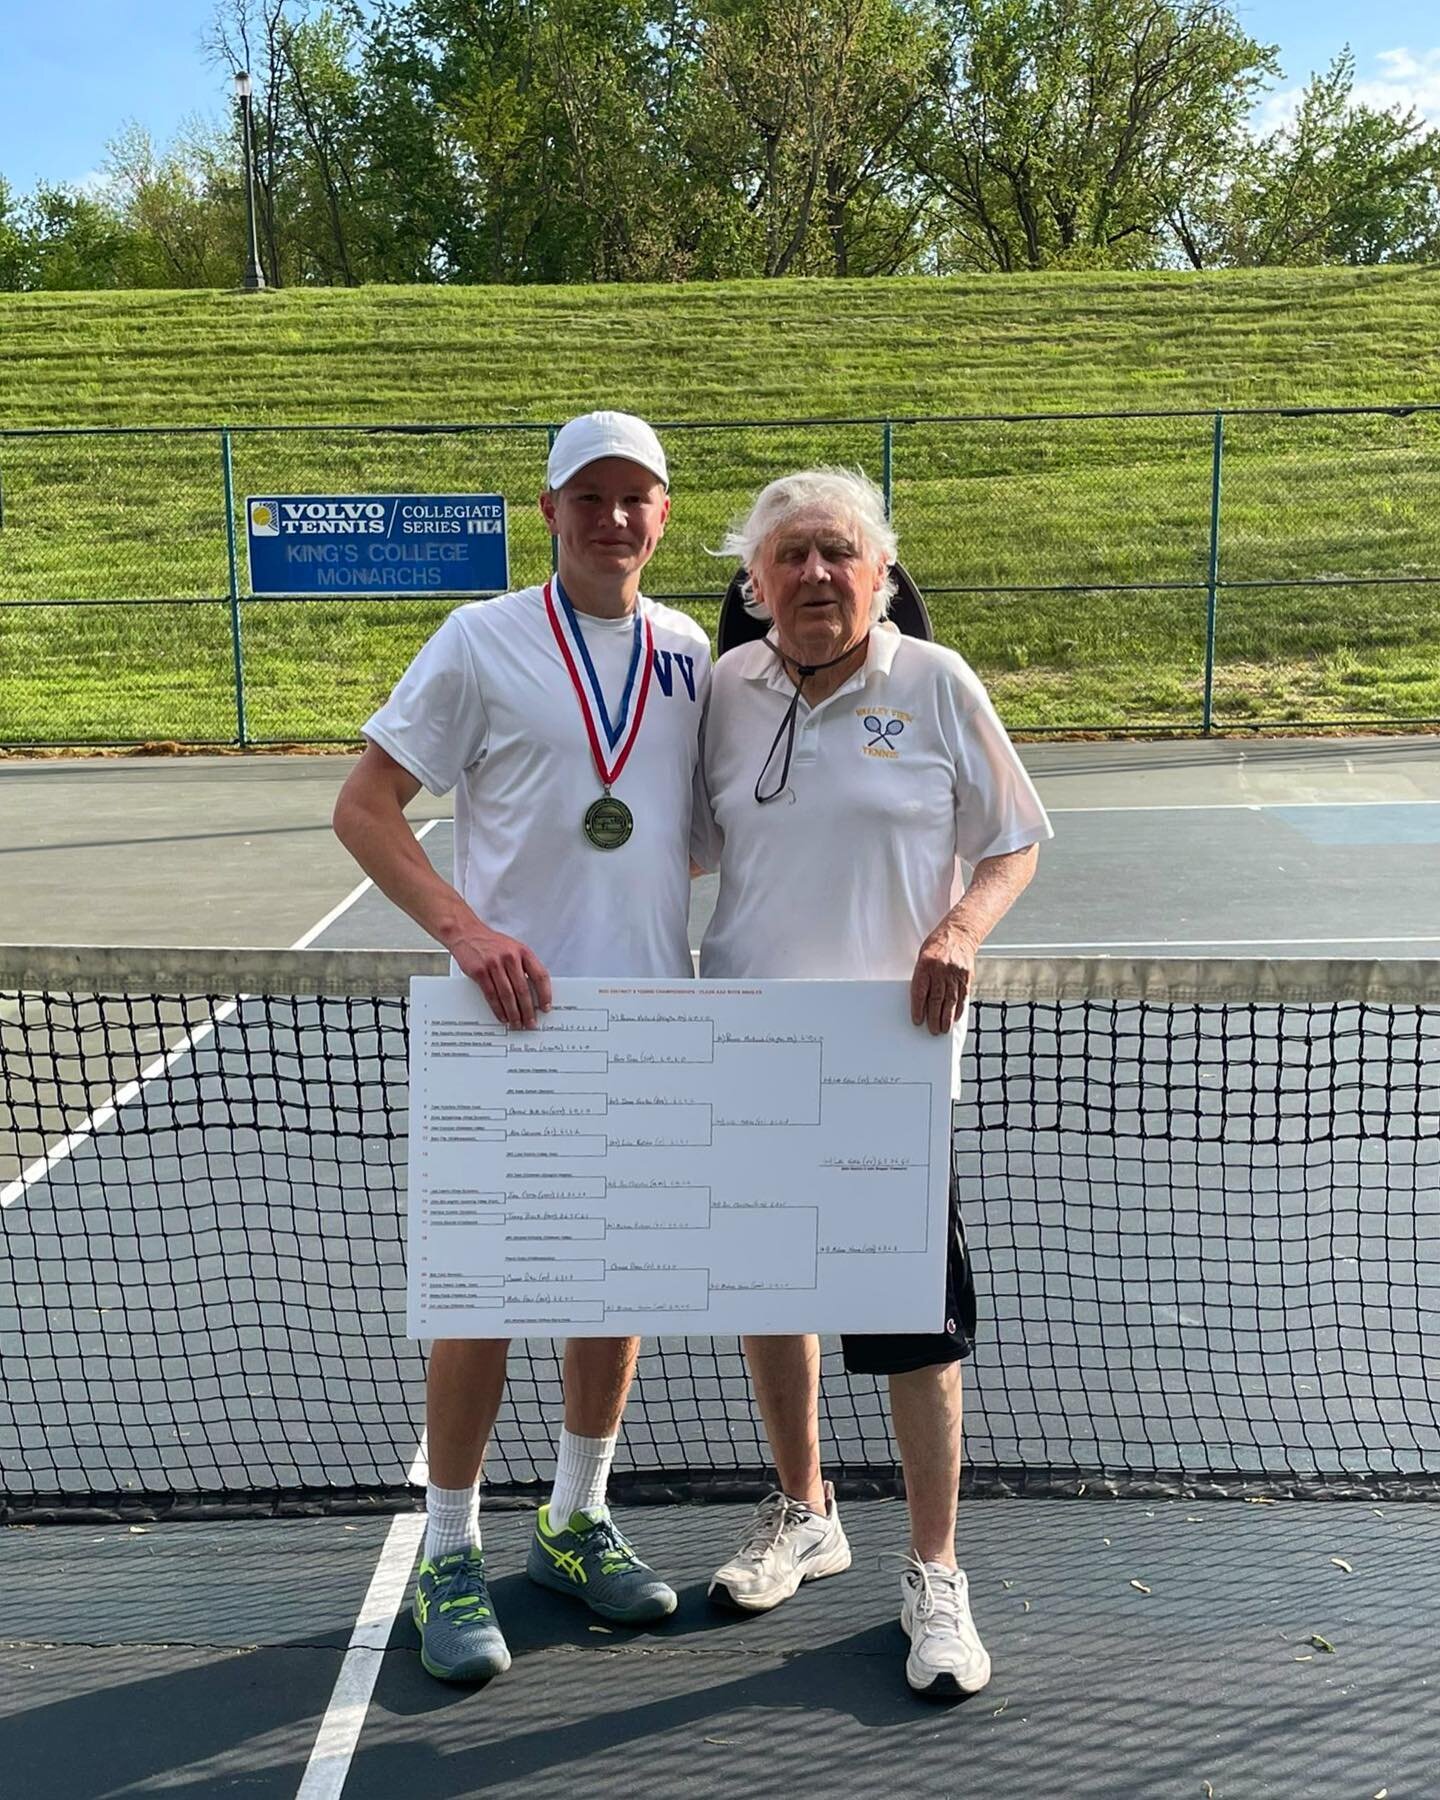 🎉🏆 Another win!

Congratulations to Luke K., a player in our Elite Program, on becoming the 2023 District II AAA Tennis Boys Singles Champion! 🎾 We couldn't be prouder of our students and their outstanding achievements.

But the celebrations don't